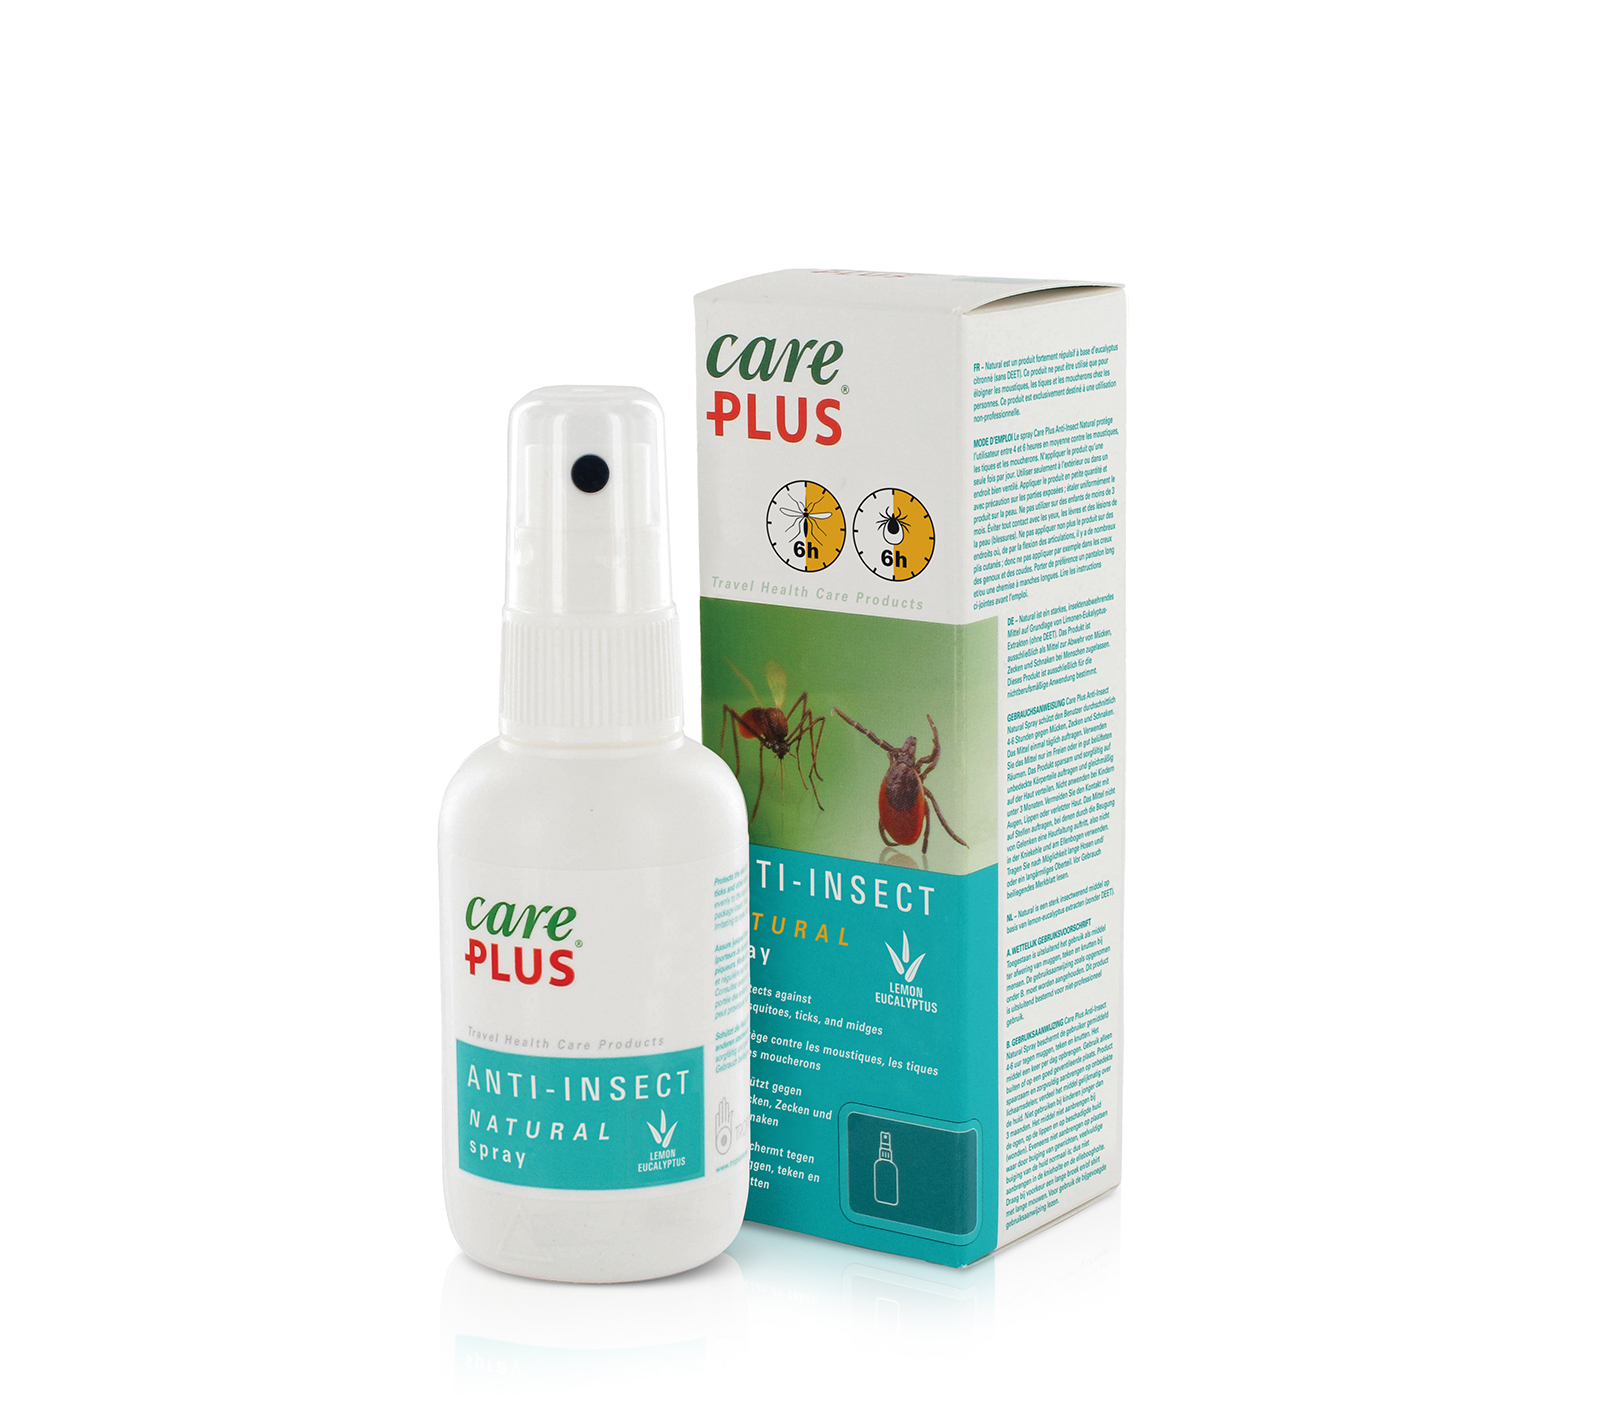 Care Plus Anti-insect Natural Spray